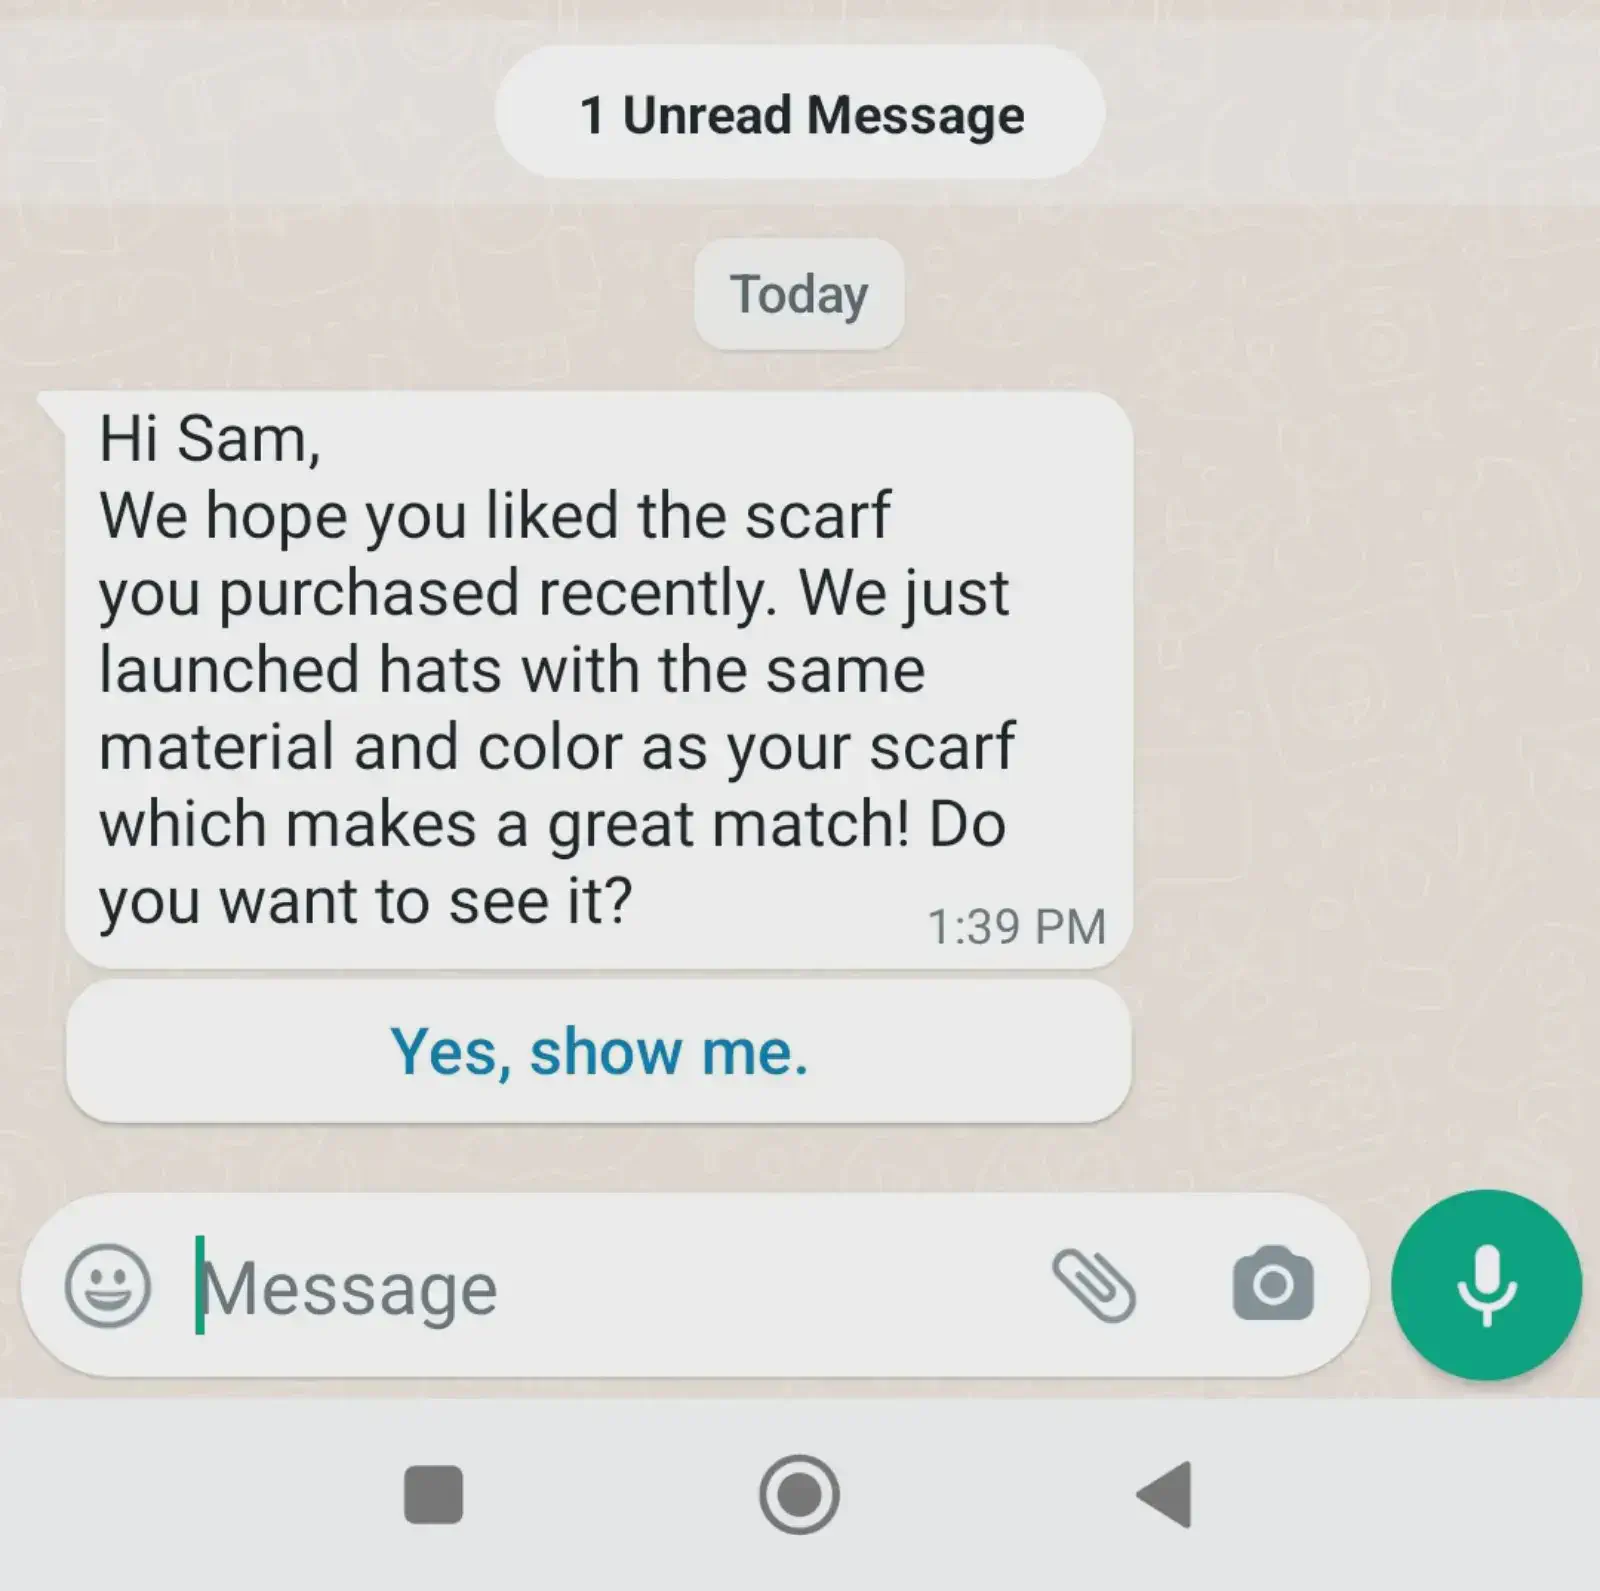 Personalized and tailored WhatsApp message, based on contact segmentation.